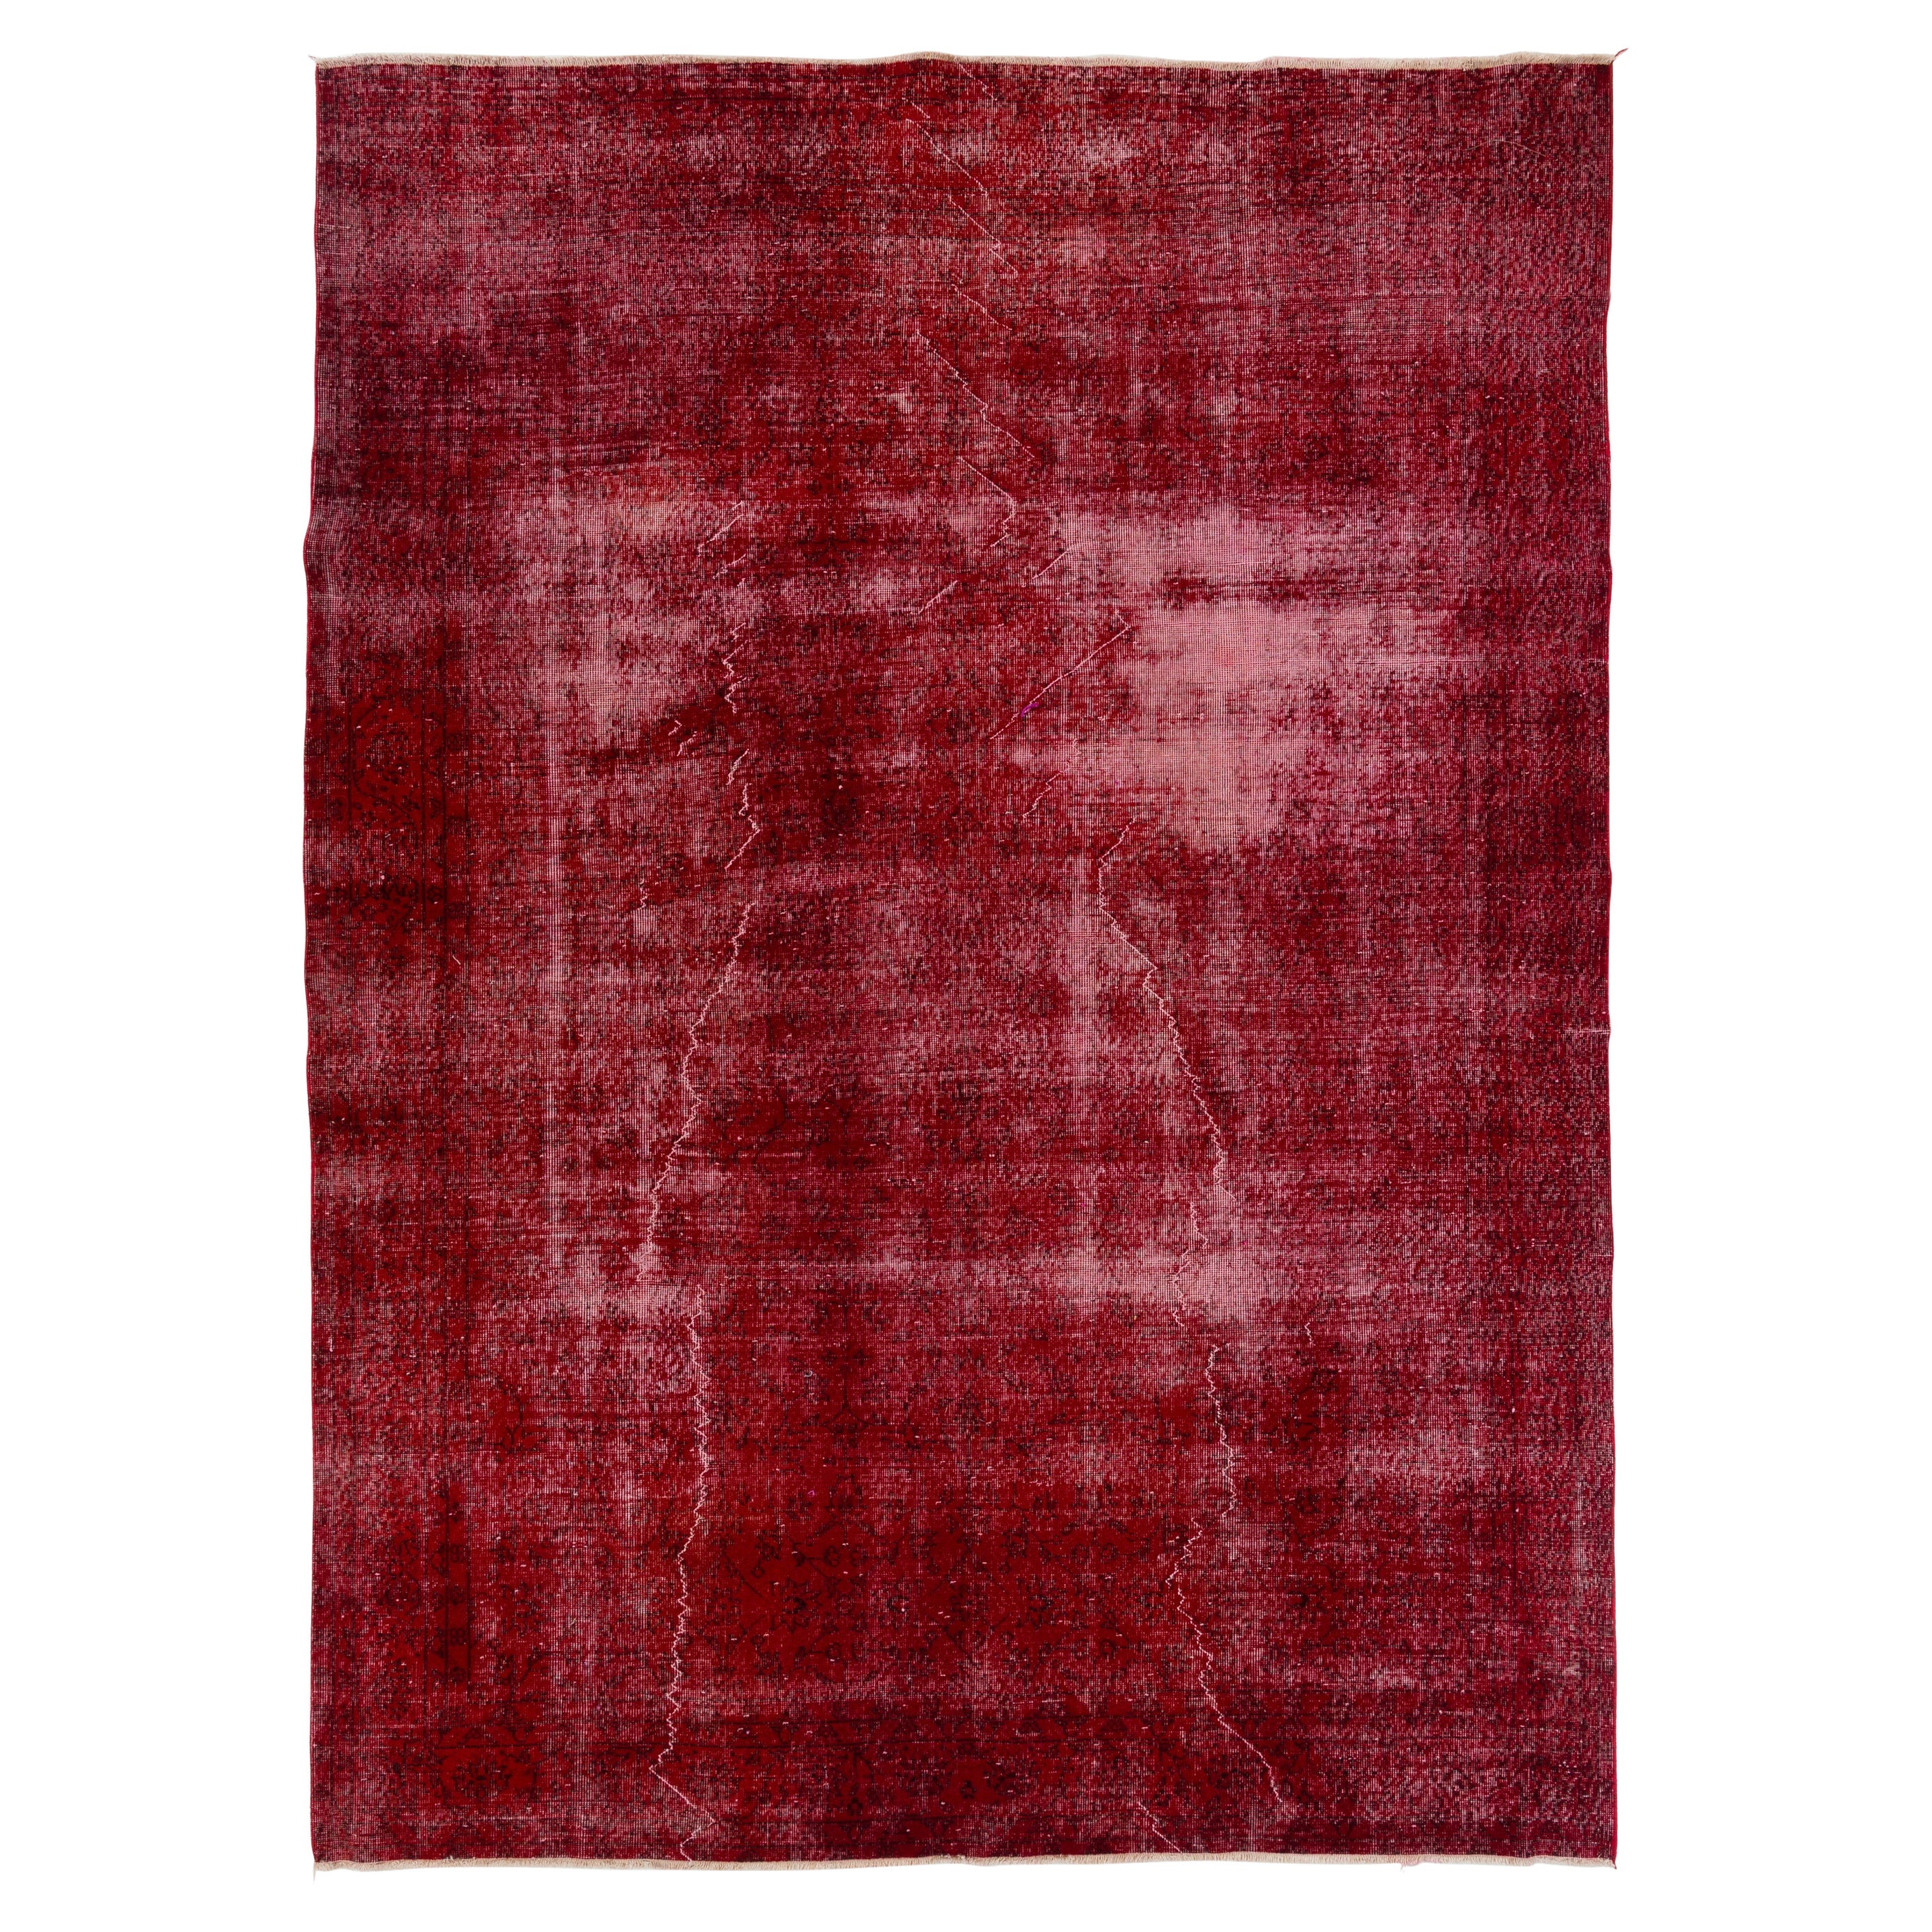 7.8x10.8 Ft Vintage Turkish Rug in Ruby Red, Distressed Handmade Wool Carpet For Sale